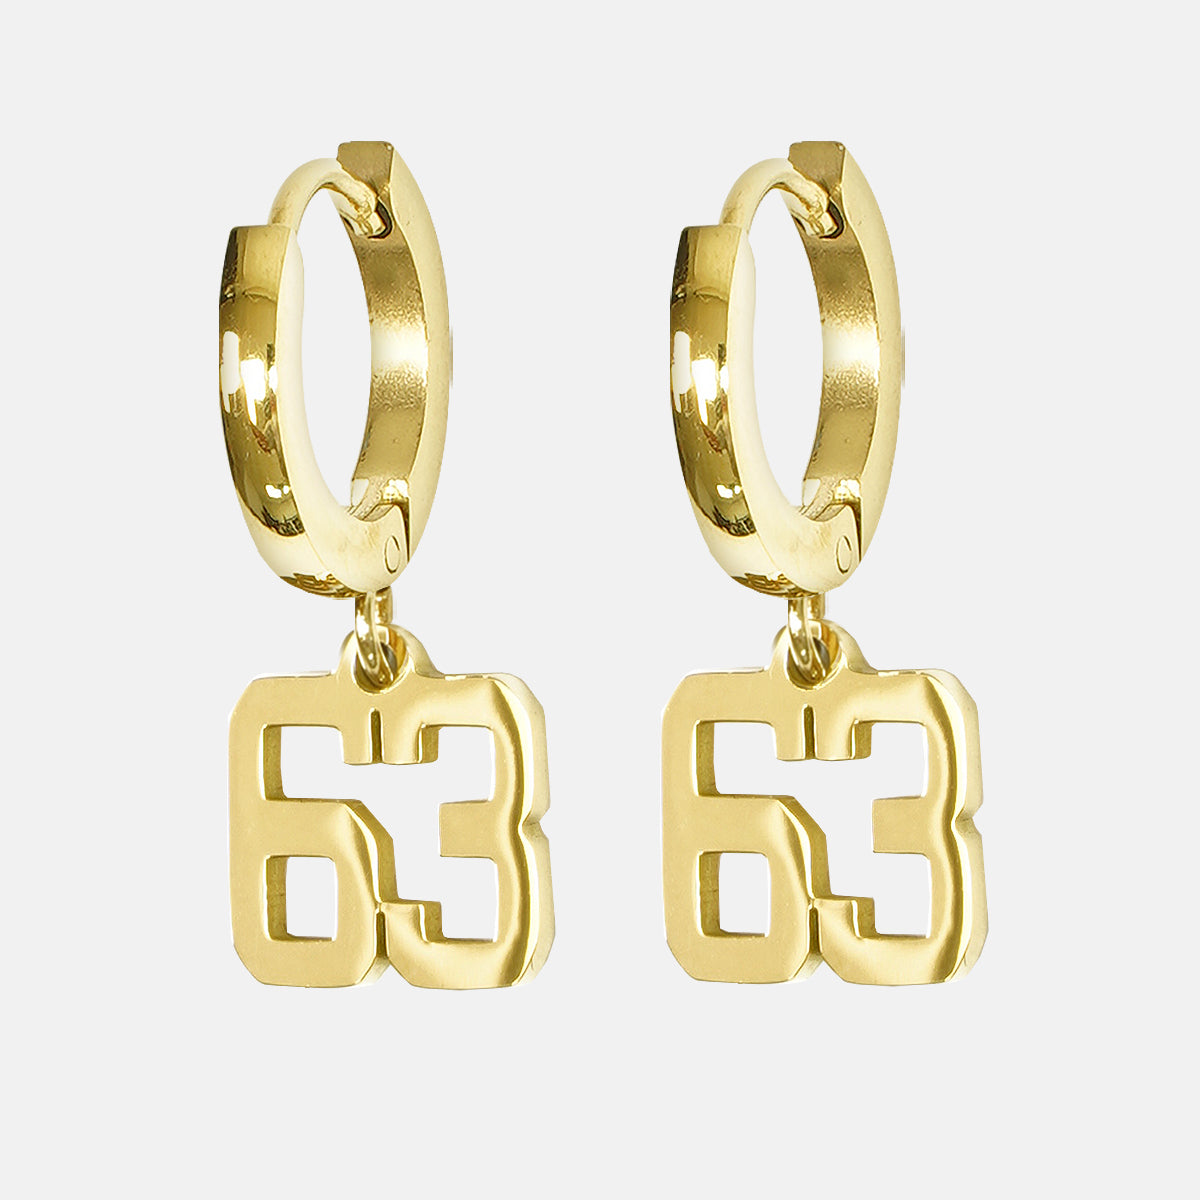 63 Number Earring - Gold Plated Stainless Steel